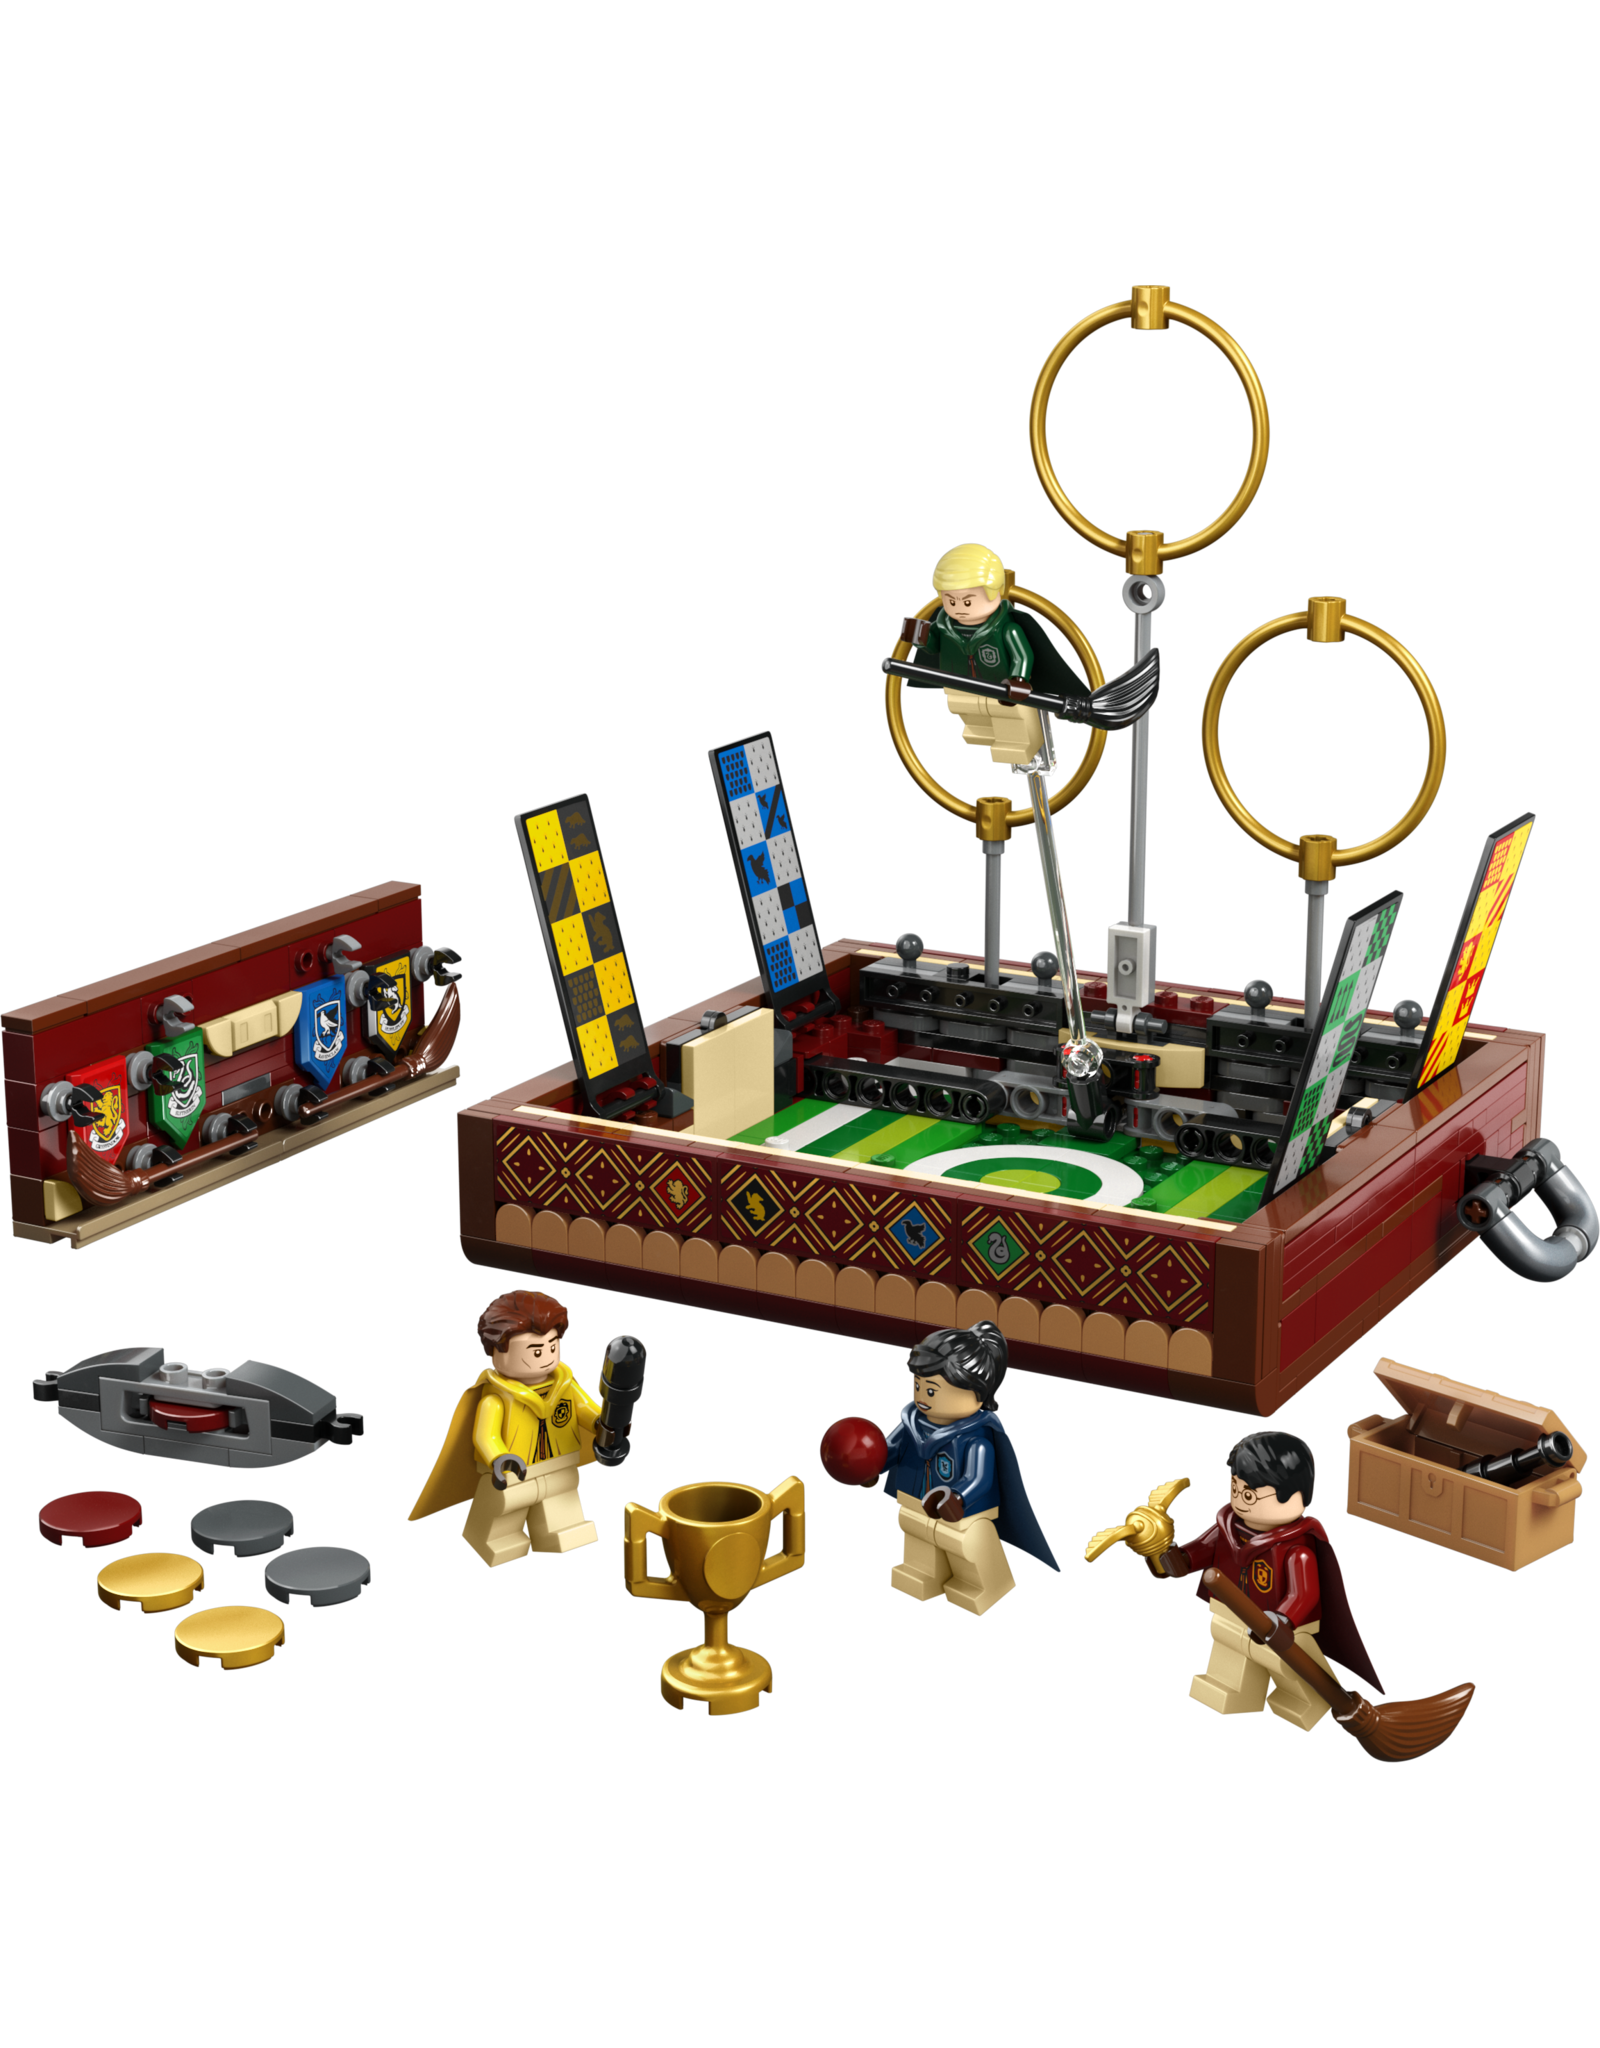 LEGO Harry Potter  76416 Quidditch Trunk